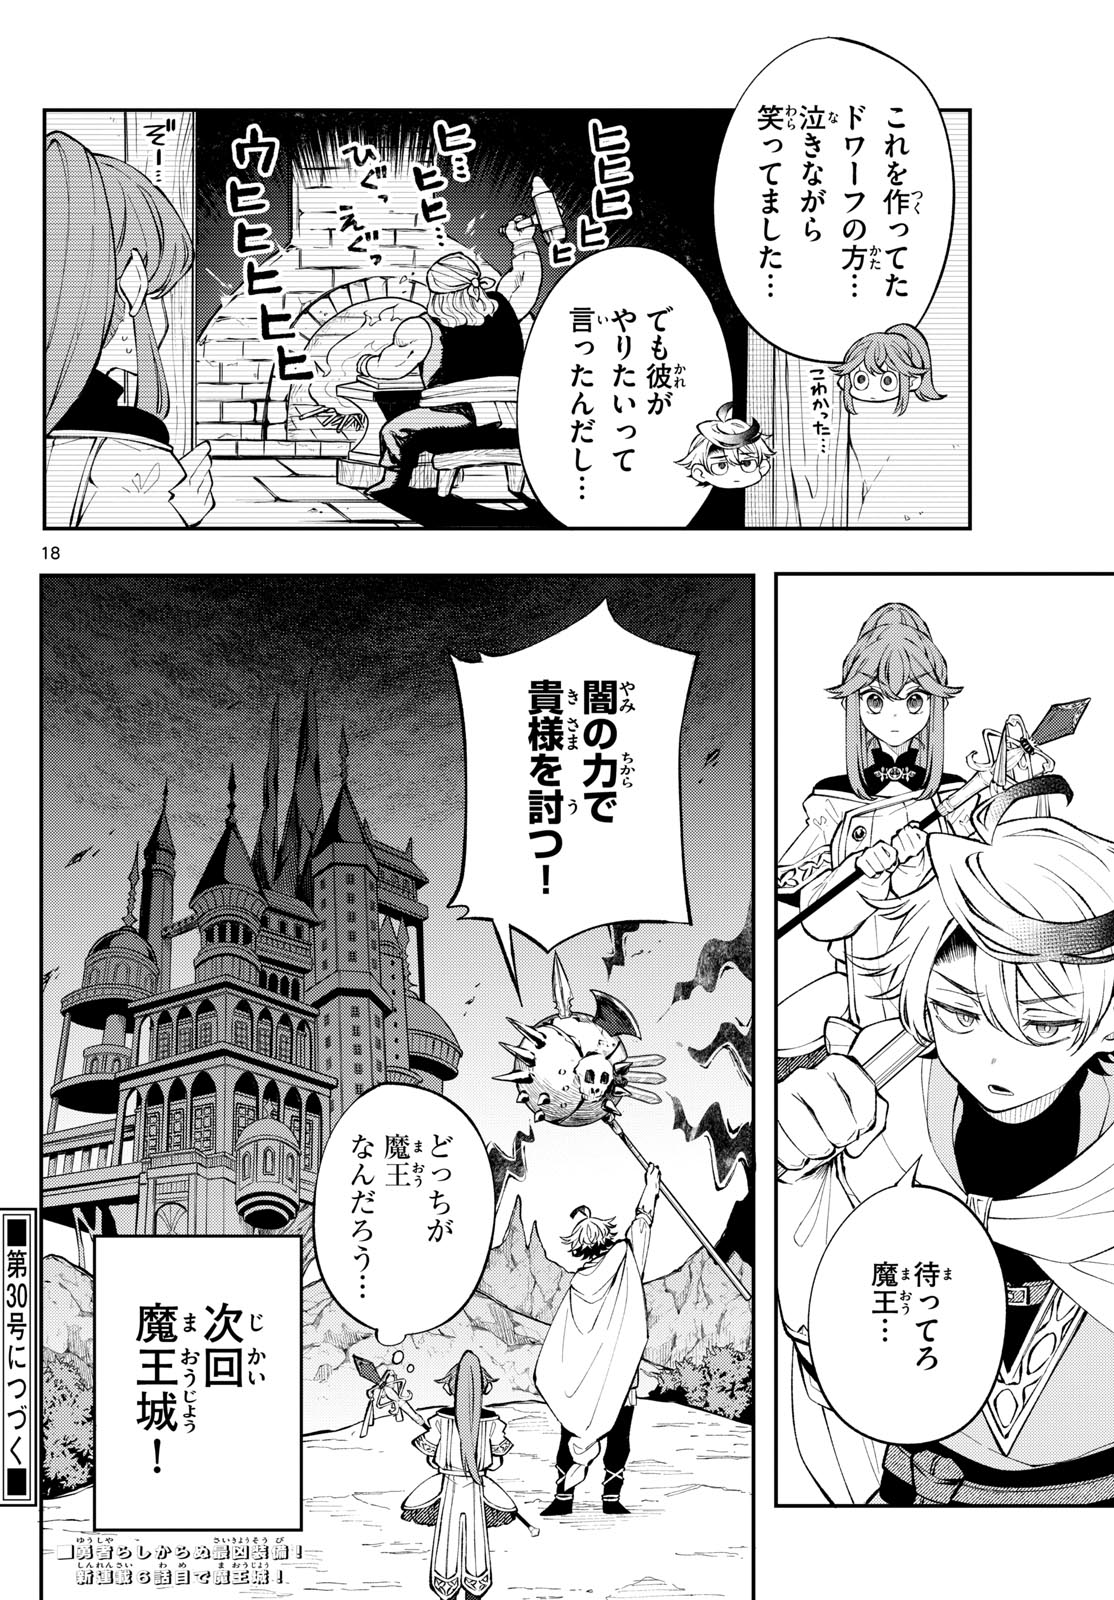 Albus Changes the World 廻天のアルバス 第5話 - Page 16